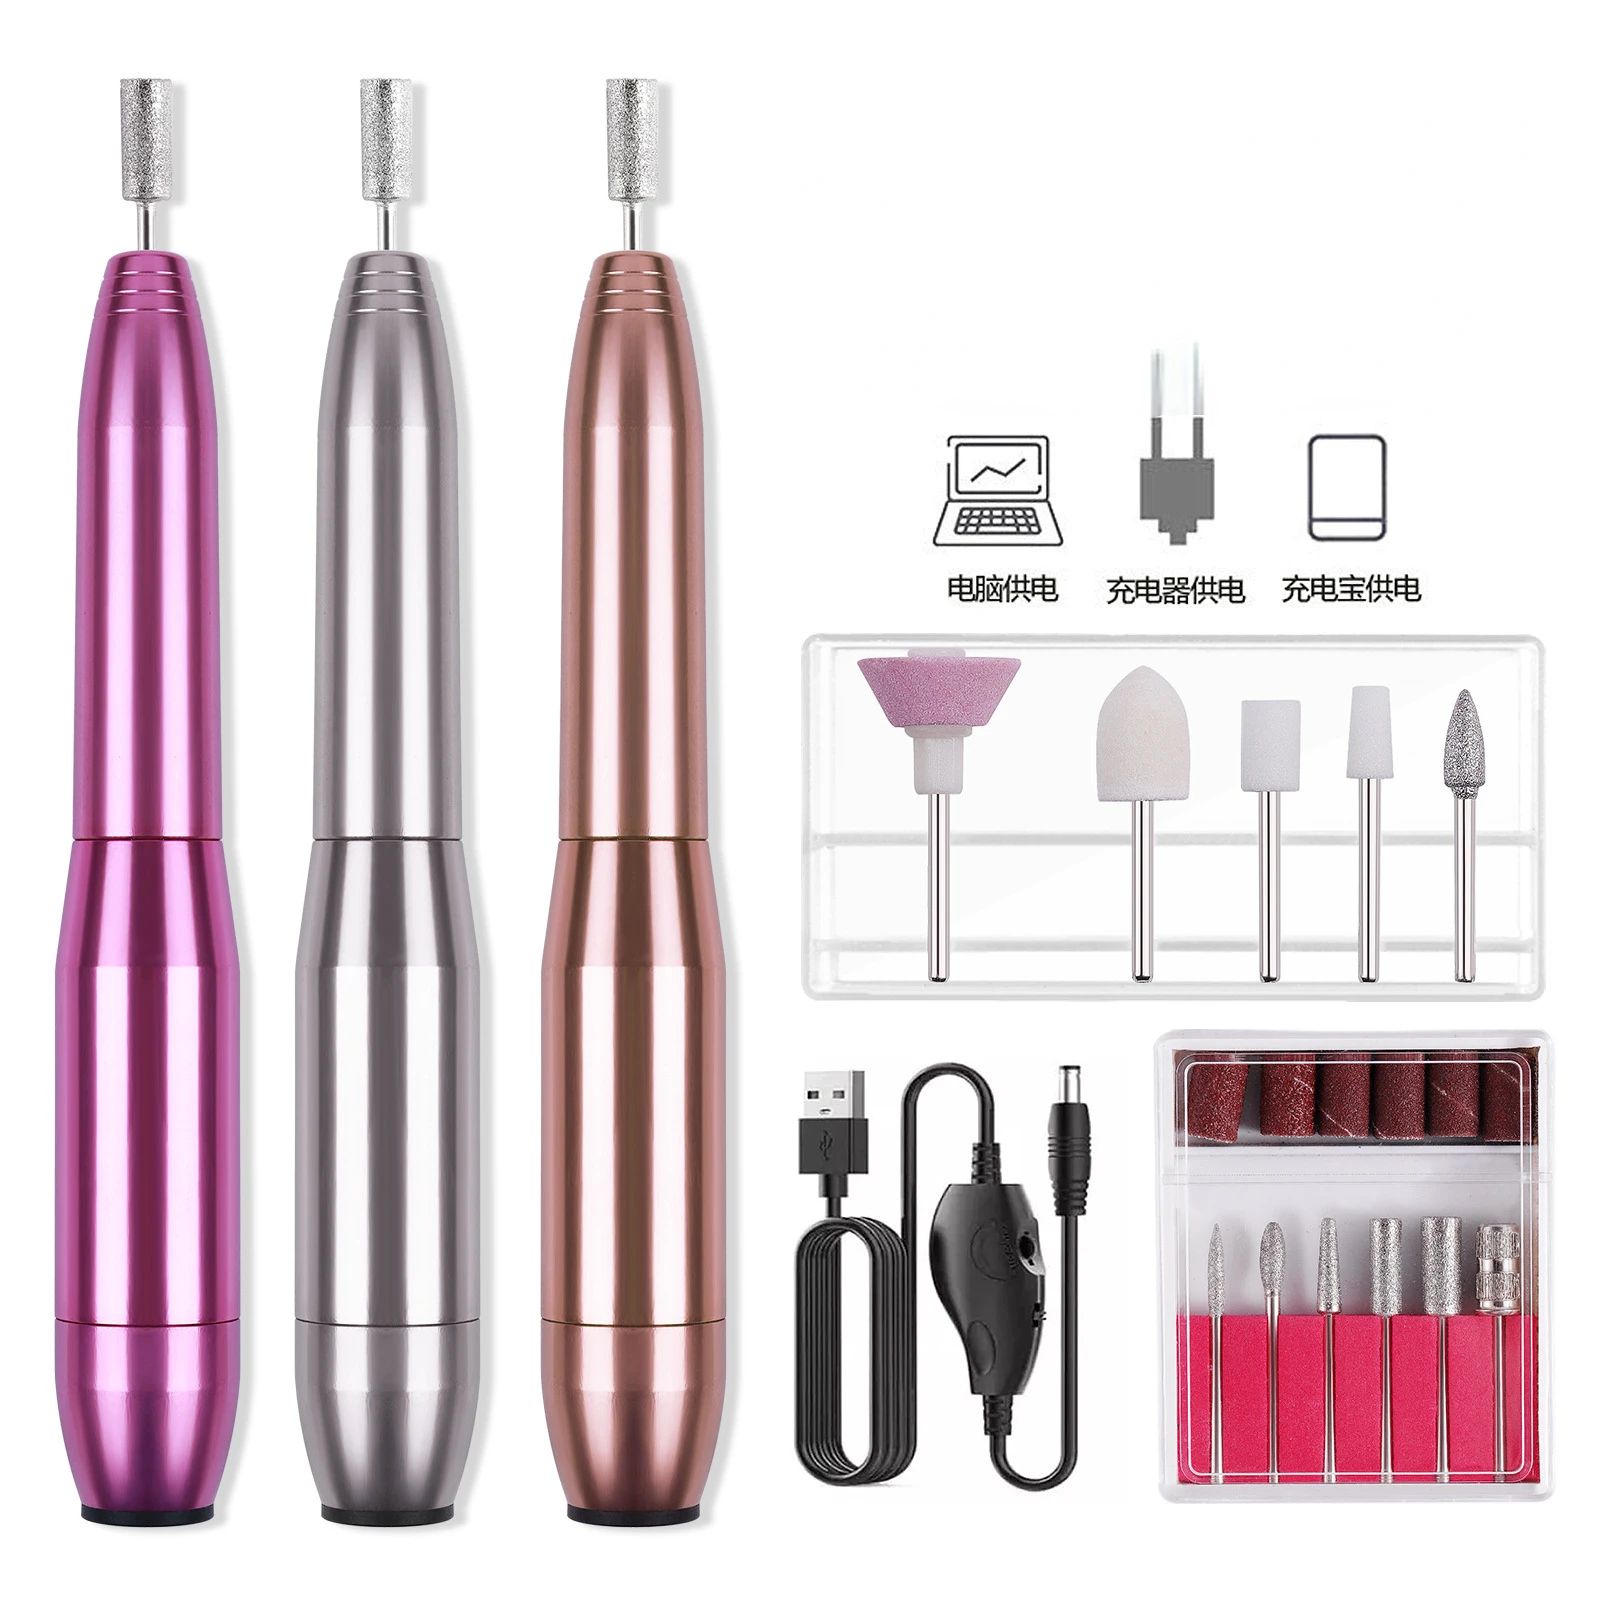 New Nail Polisher Usb Portable In-line Nail Polisher Pen Nail Machine Manicure Tool Nail Remover Set